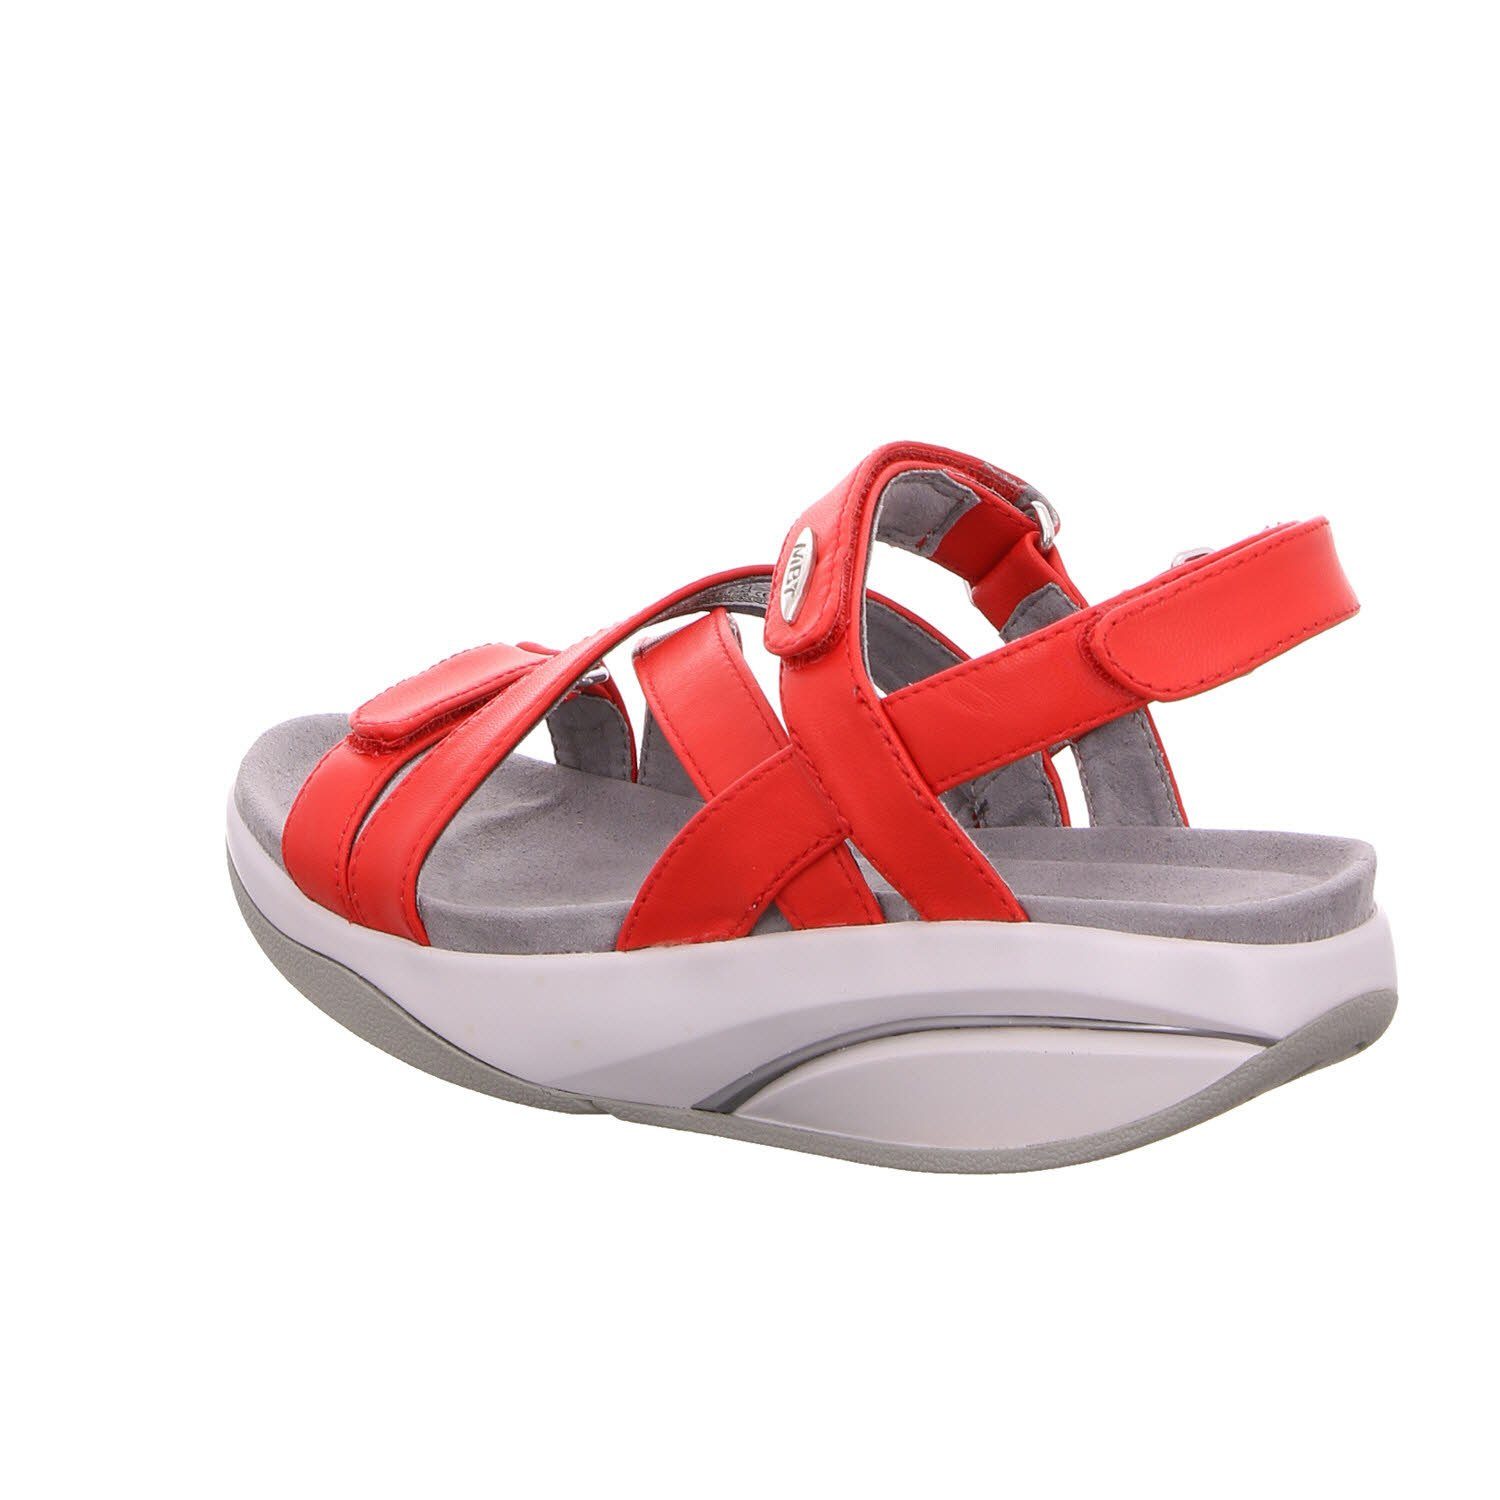 06 400319 Sandale MBT (RED) Rot